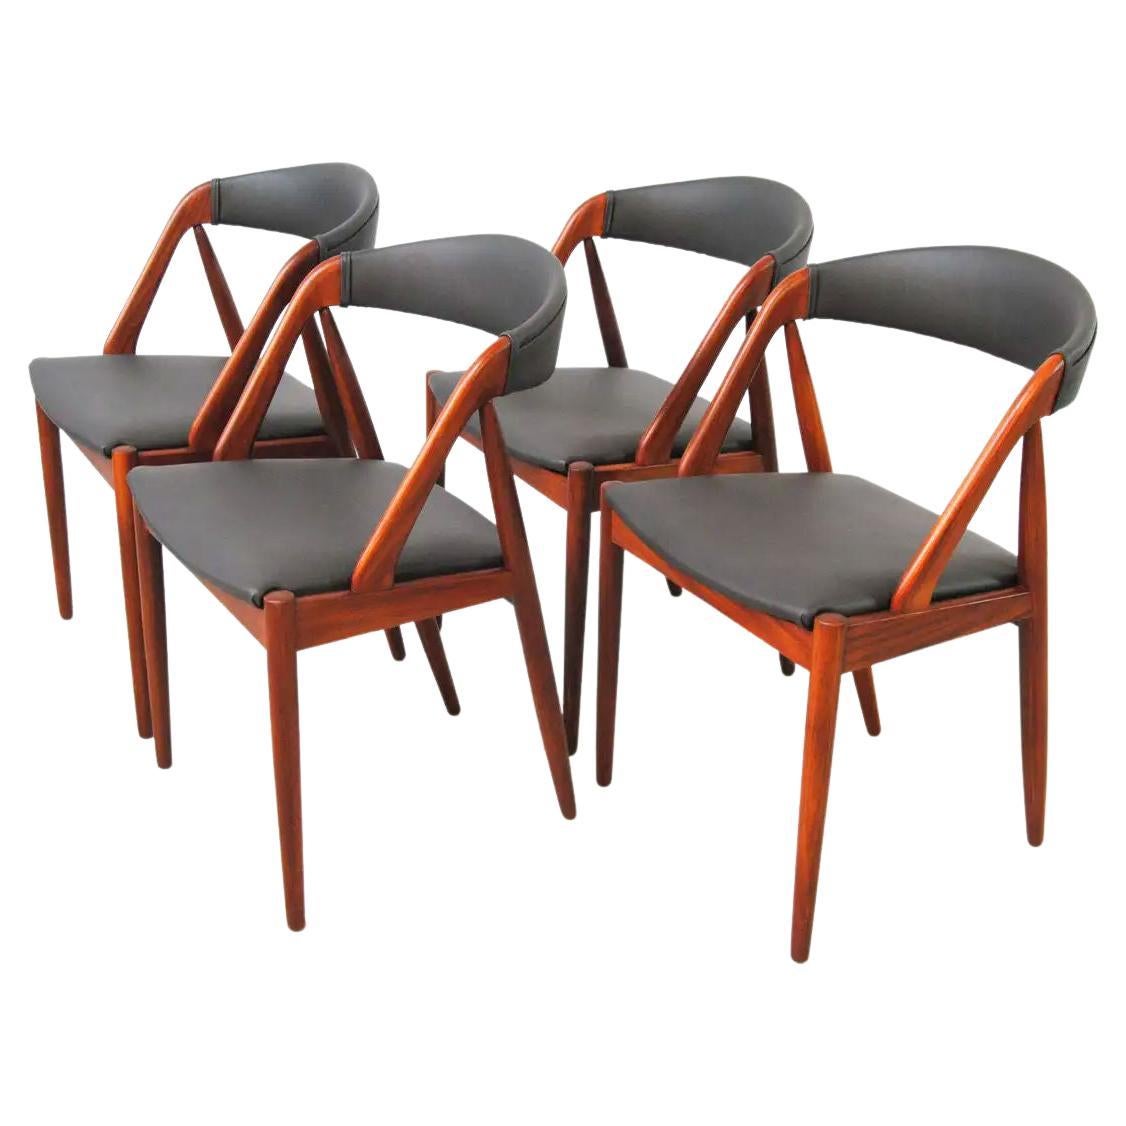 Four Restored Kai Kristiansen Teak Dining Chairs, Custom Reupholstery Included For Sale